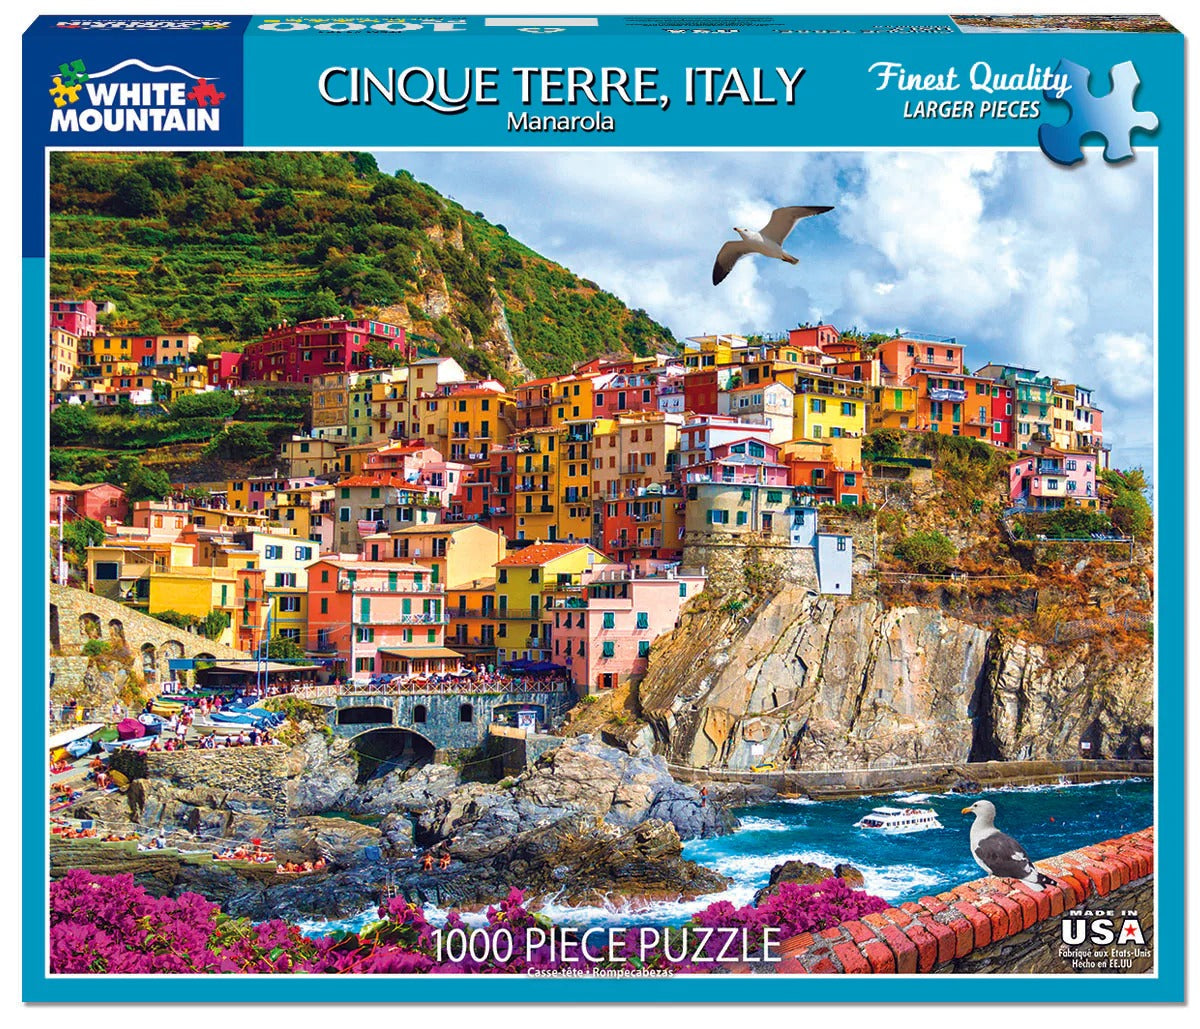 Cinque Terre, Italy 1000 Piece Jigsaw Puzzle by White Mountain